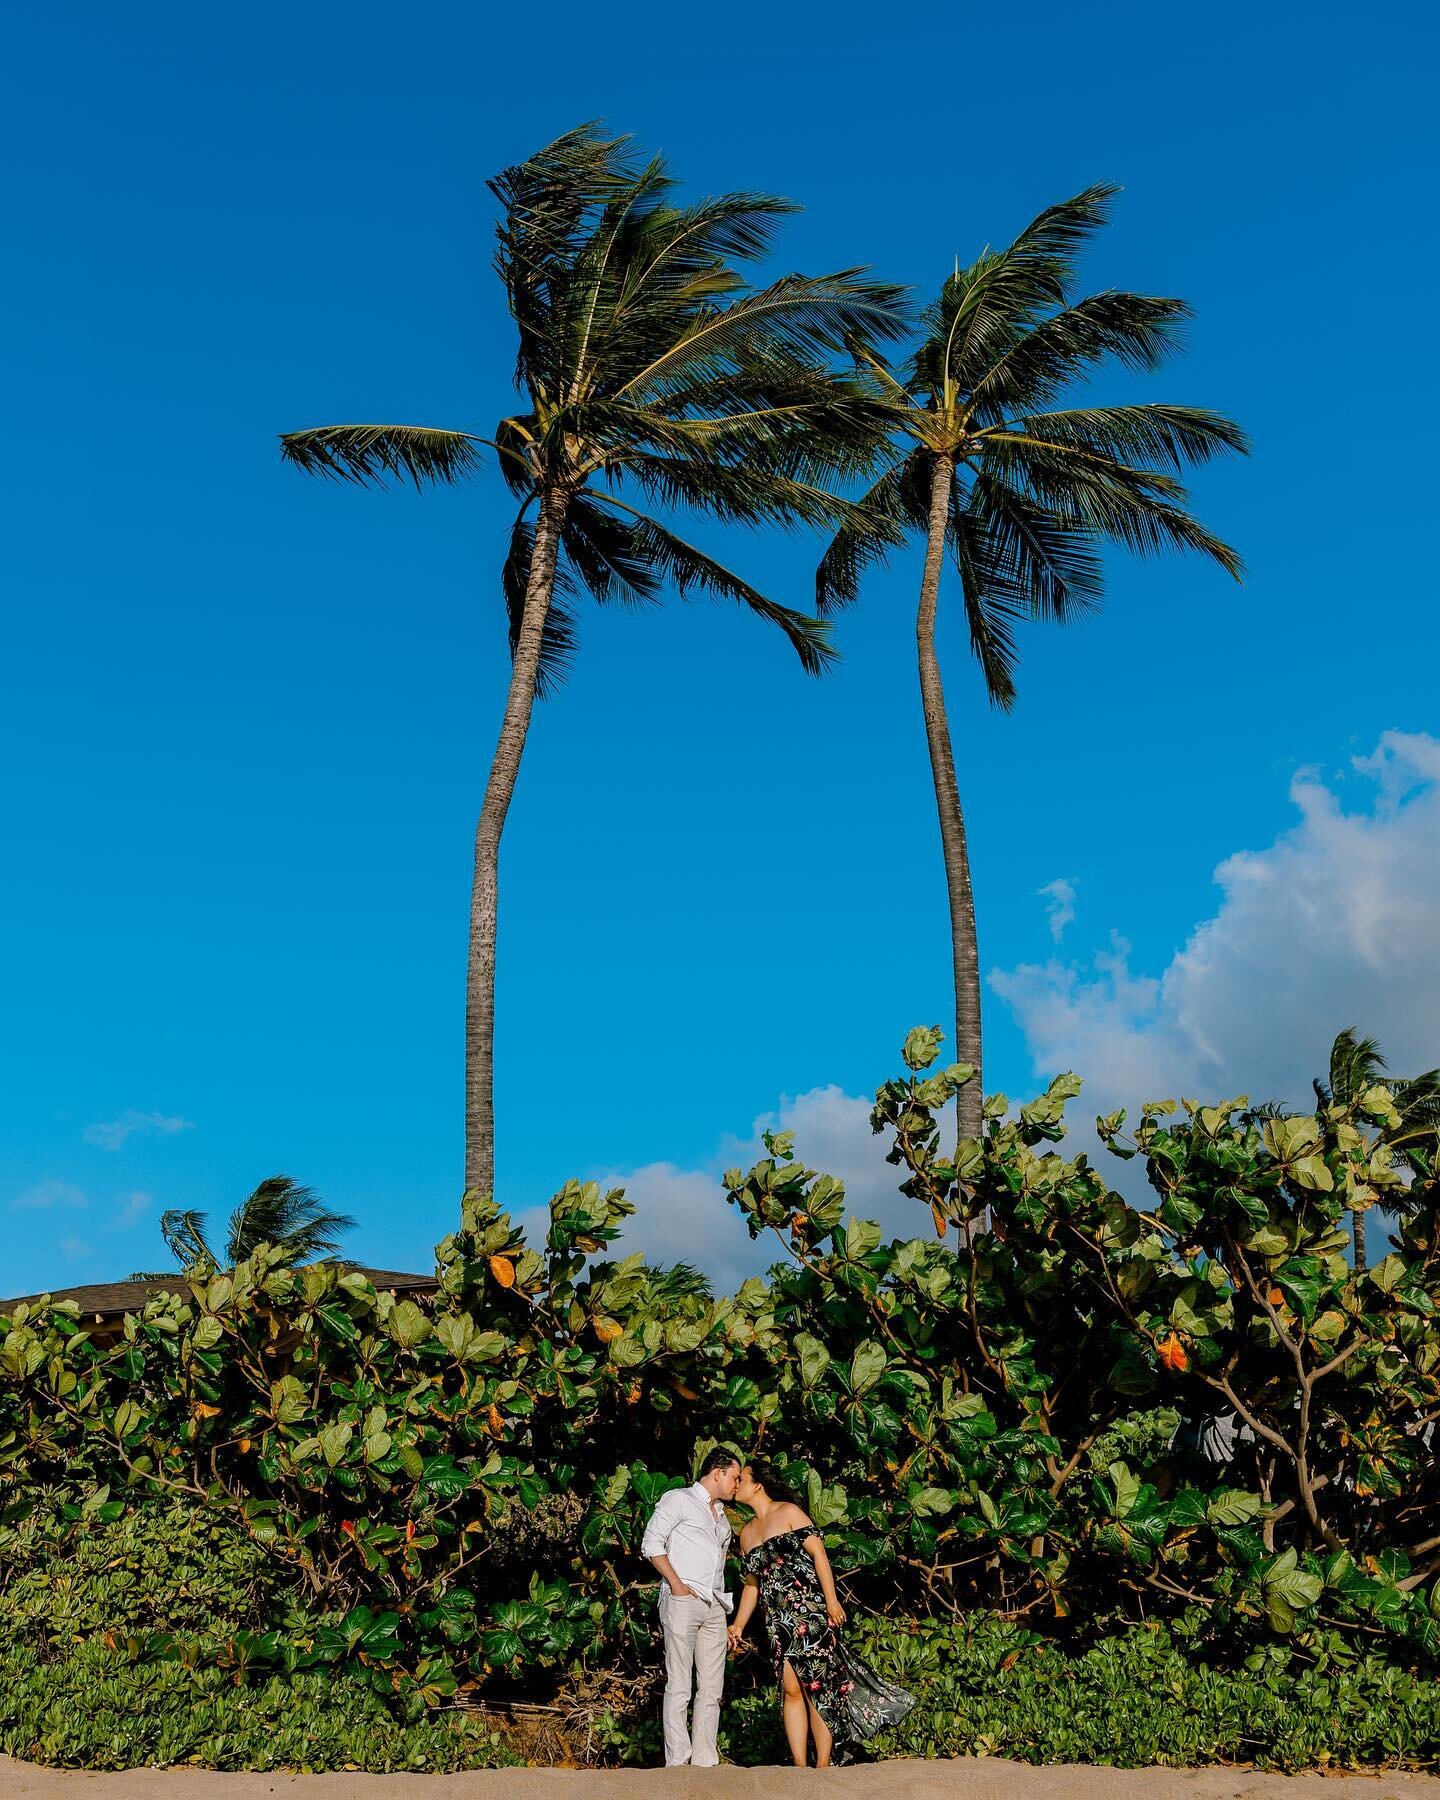 #coloryourfeed 💙 today in @vanessahicksphotography challenge!  And it&rsquo;s Aloha Friday!  What are your weekend plans?

#mauiphotographer #mauicouplesphotographer #mauicouples #mauicouplesphotography #mauiengagementphotographer #mauiengagement #m